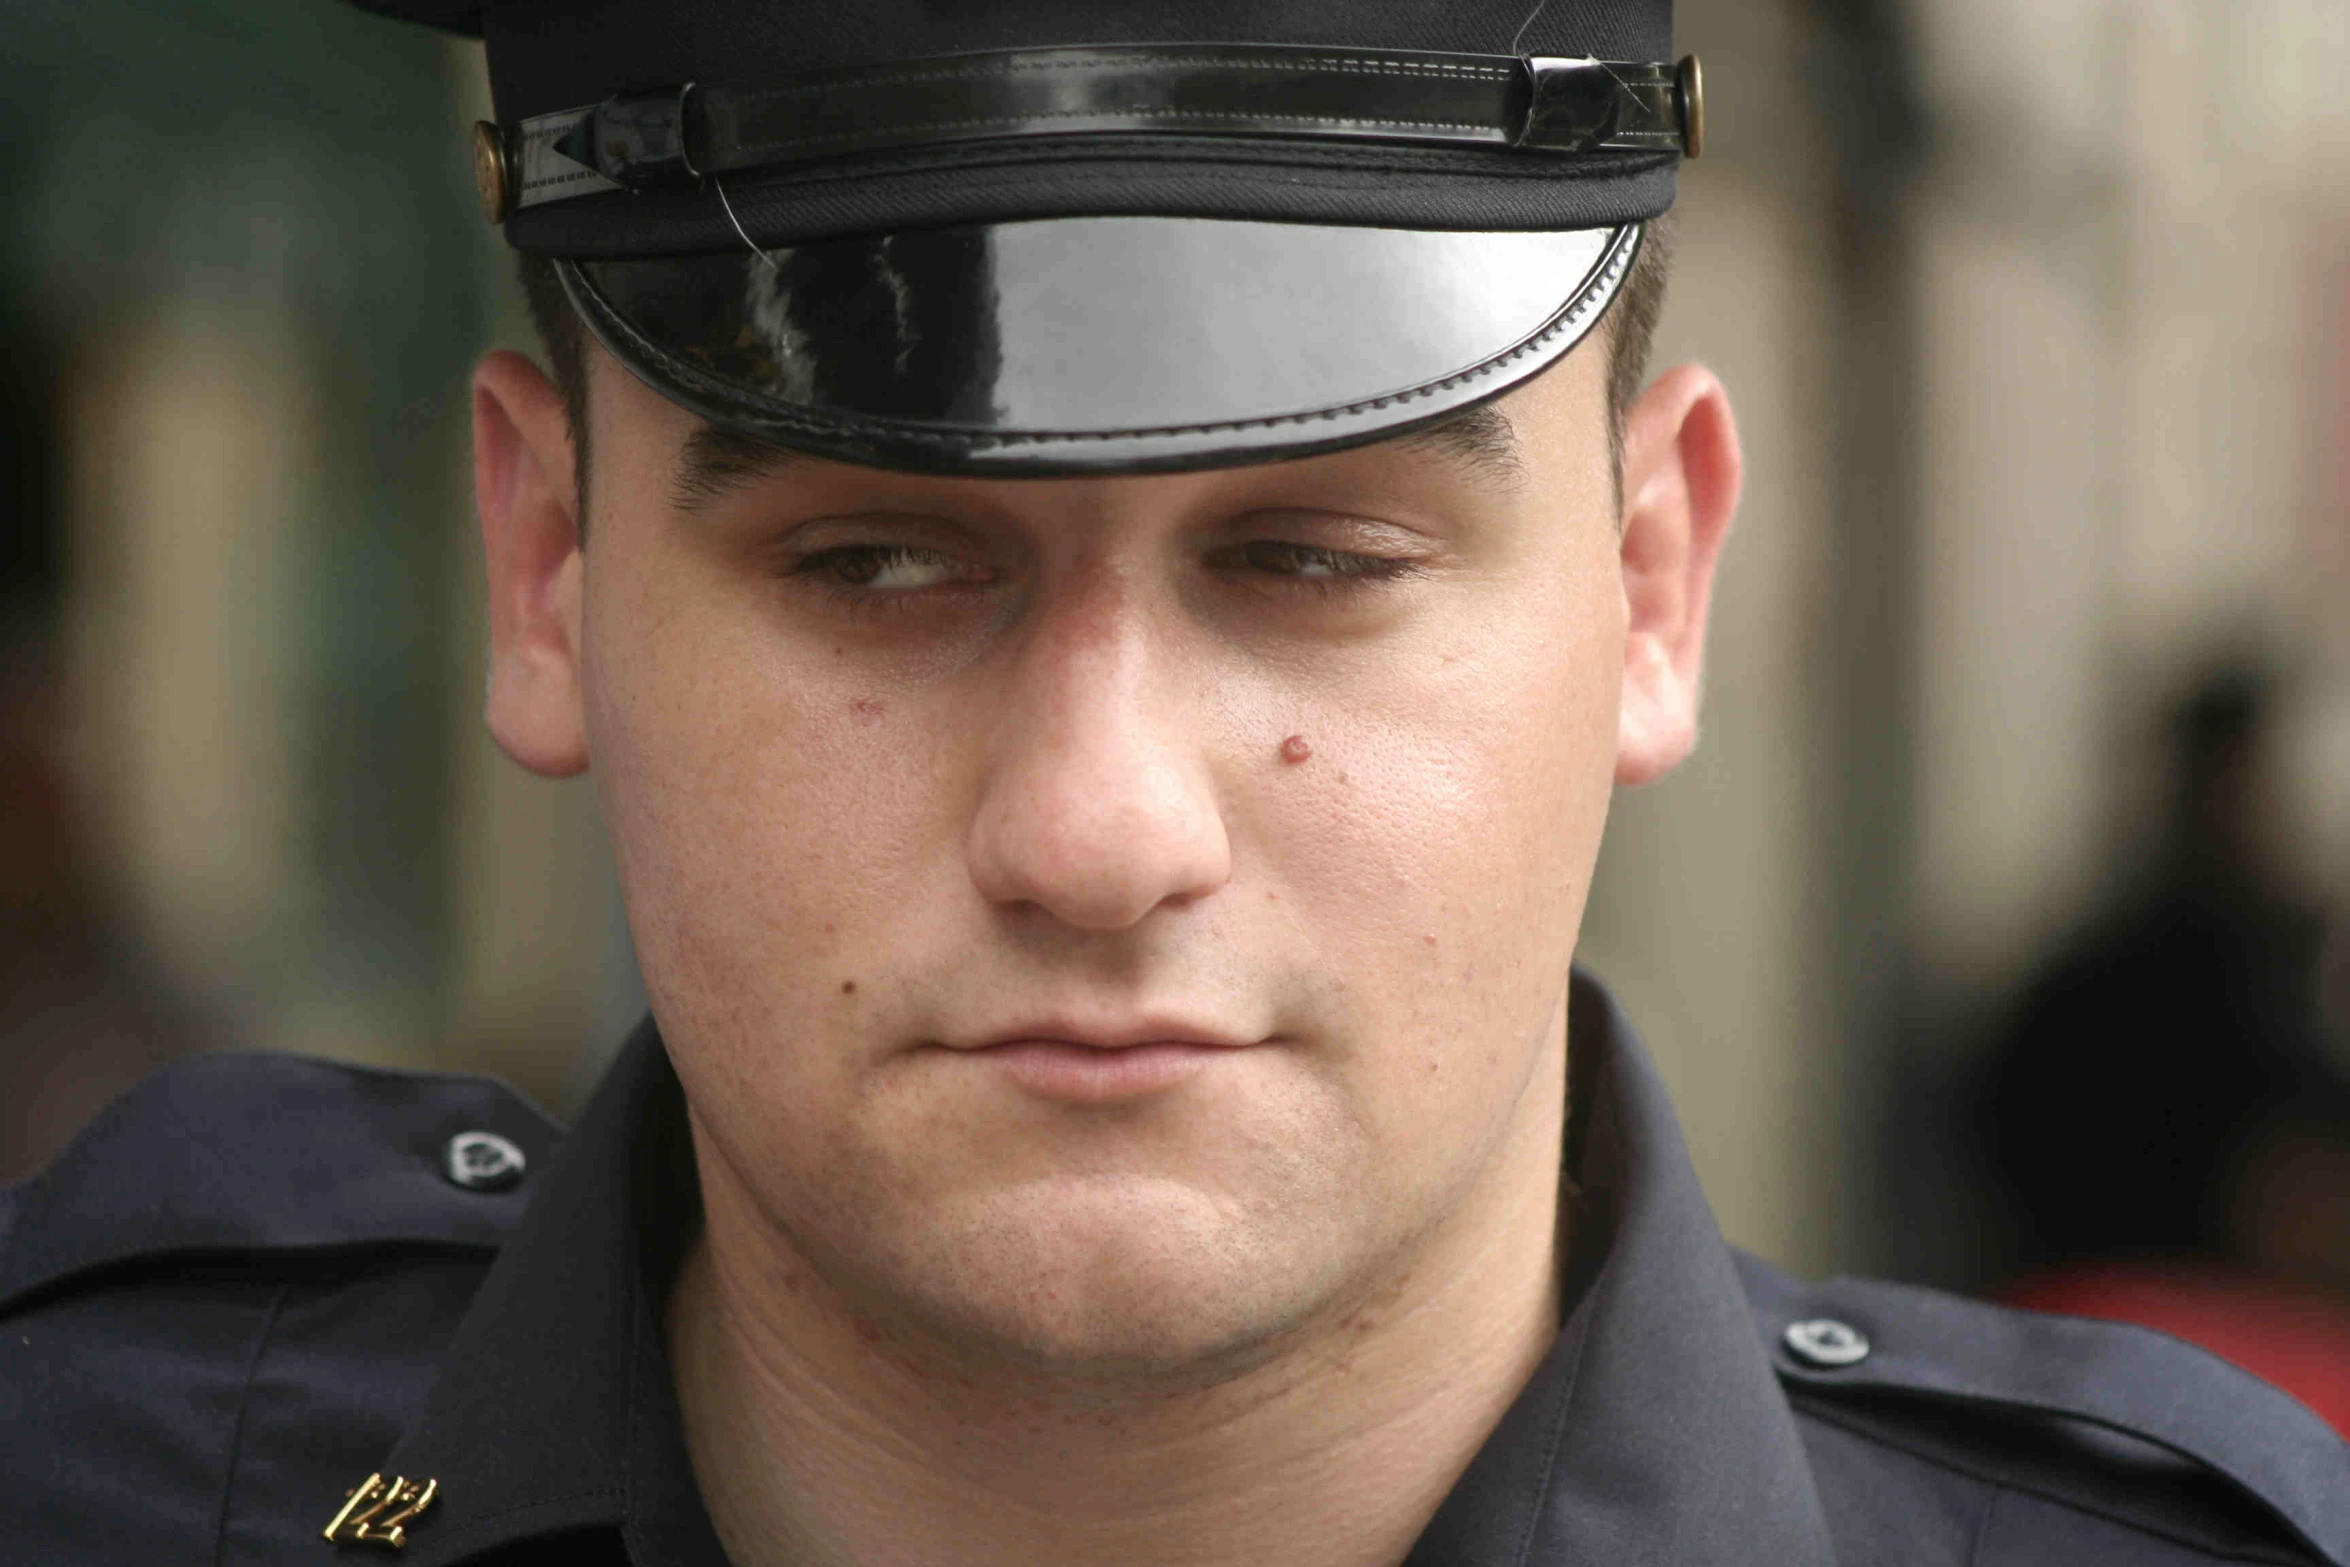 a close up of a person wearing uniform